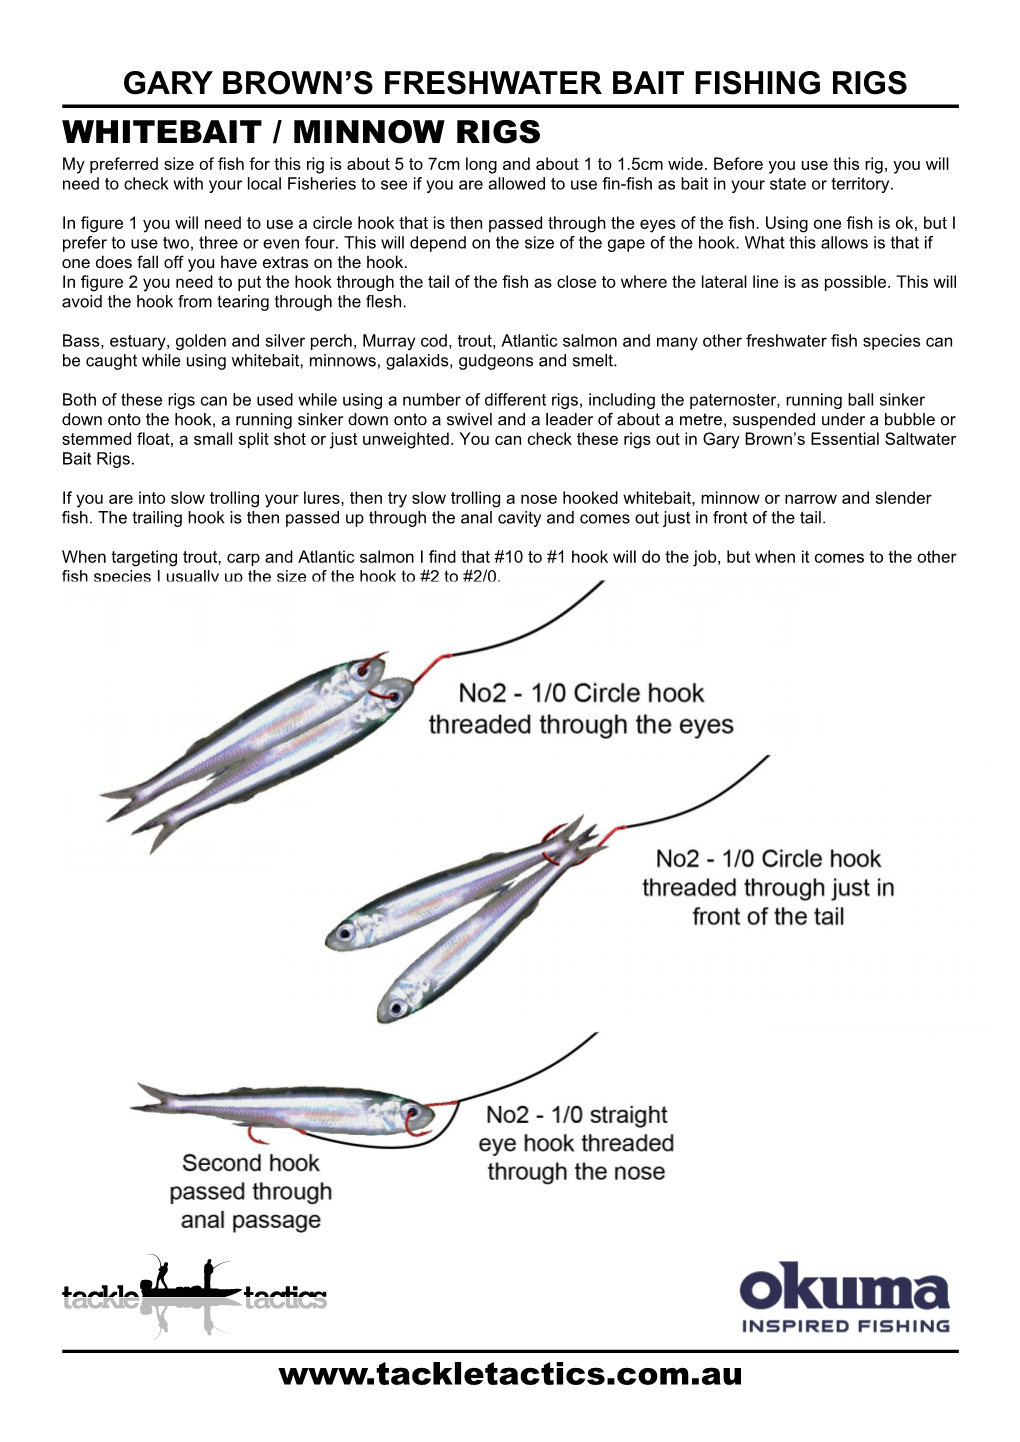 WHITEBAIT / MINNOW RIGS My Preferred Size of Fish for This Rig Is About 5 to 7Cm Long and About 1 to 1.5Cm Wide